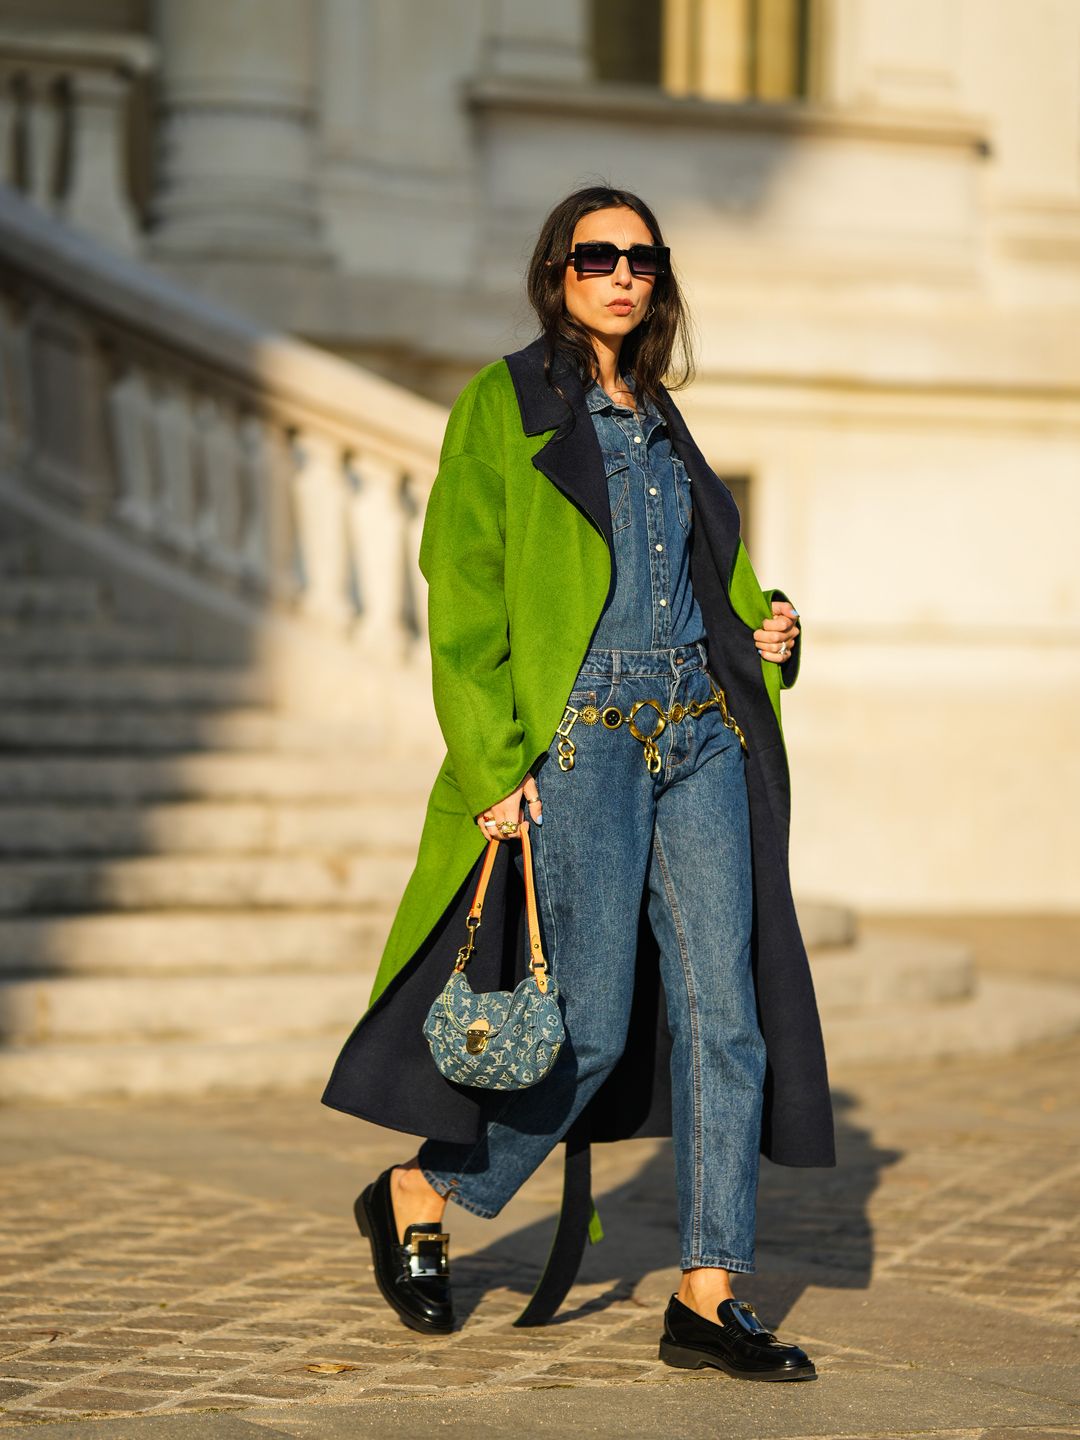 PARIS, FRANCE - NOVEMBER 10: Gabriella Berdugo wears a blue denim shirt from Wrangler, matching blue denim jeans pants from Wrangler, a vintage golden chain belt, black leather loafer shoes with buckle from Roger Vivier, a blue denim vintage Louis Vuitton bag with printed logo monogram, a reversible green and blue long coat from Essentiel Antwerp, during a street style fashion photo session, on November 10, 2021 in Paris, France. (Photo by Edward Berthelot/Getty Images)